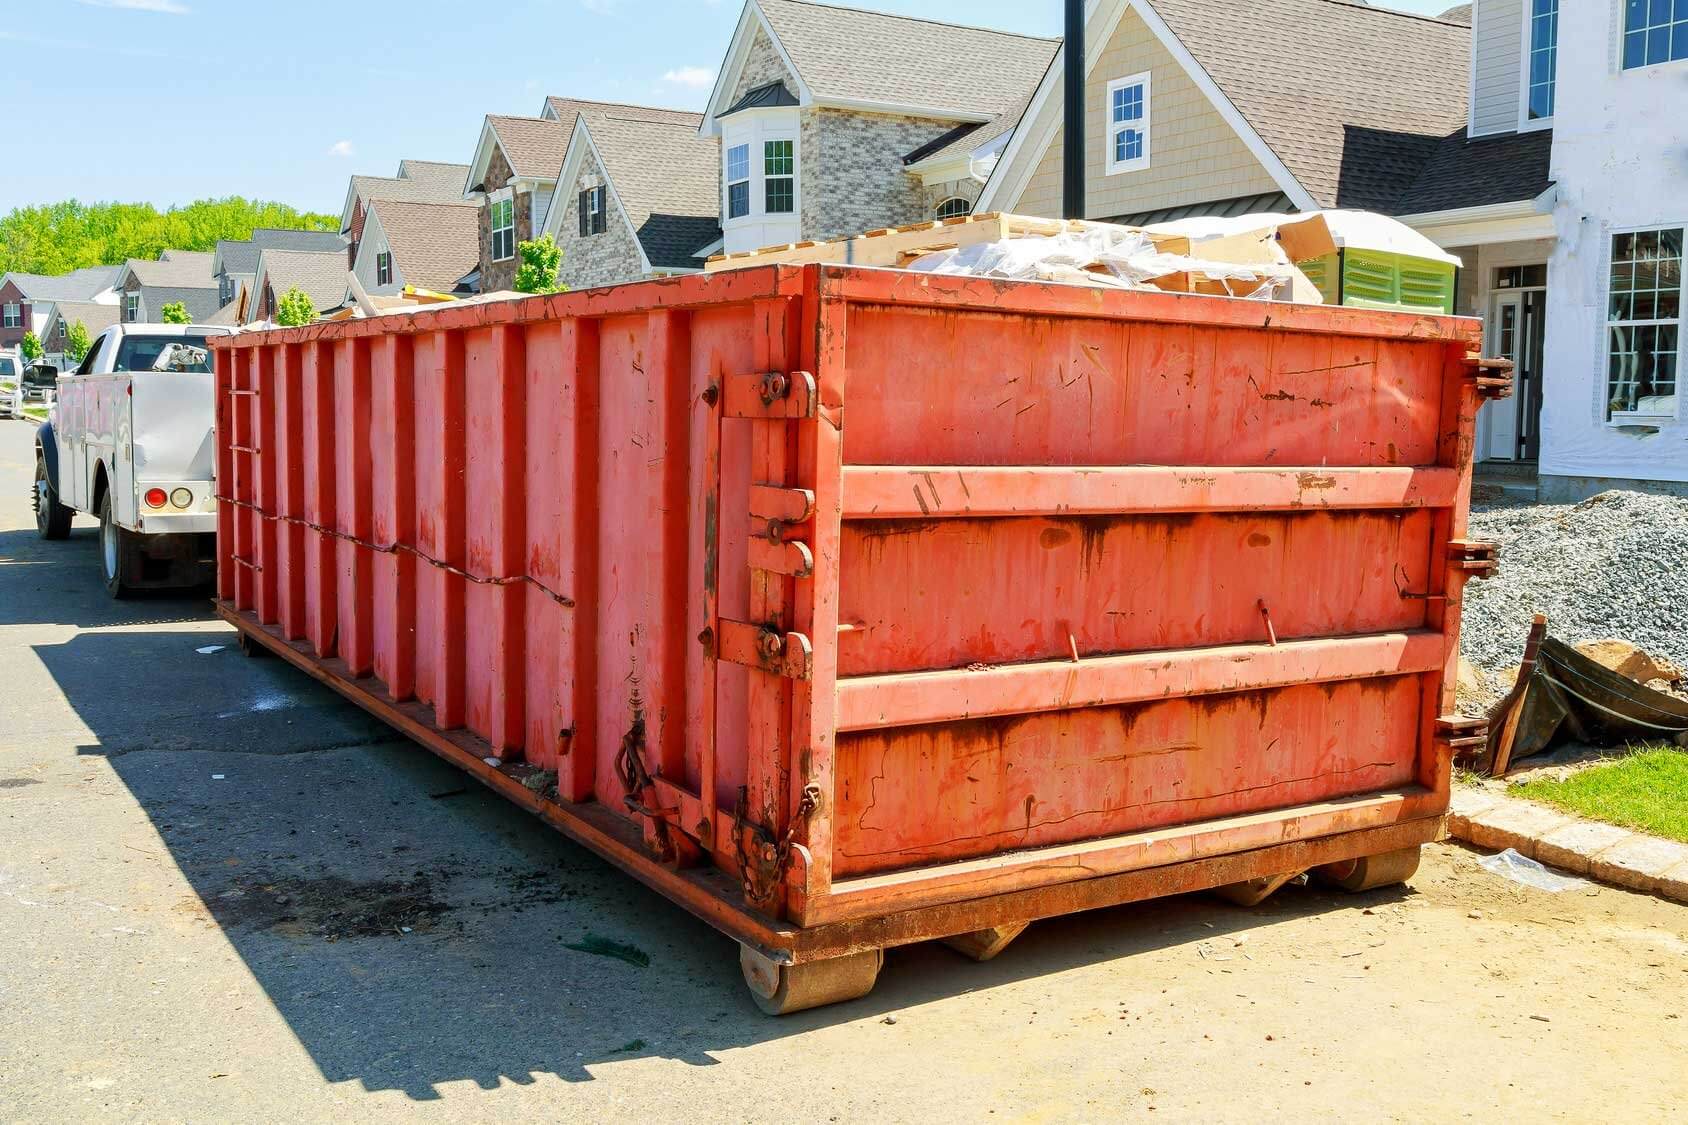 Benefits of Dumpster Rentals for Business Owners